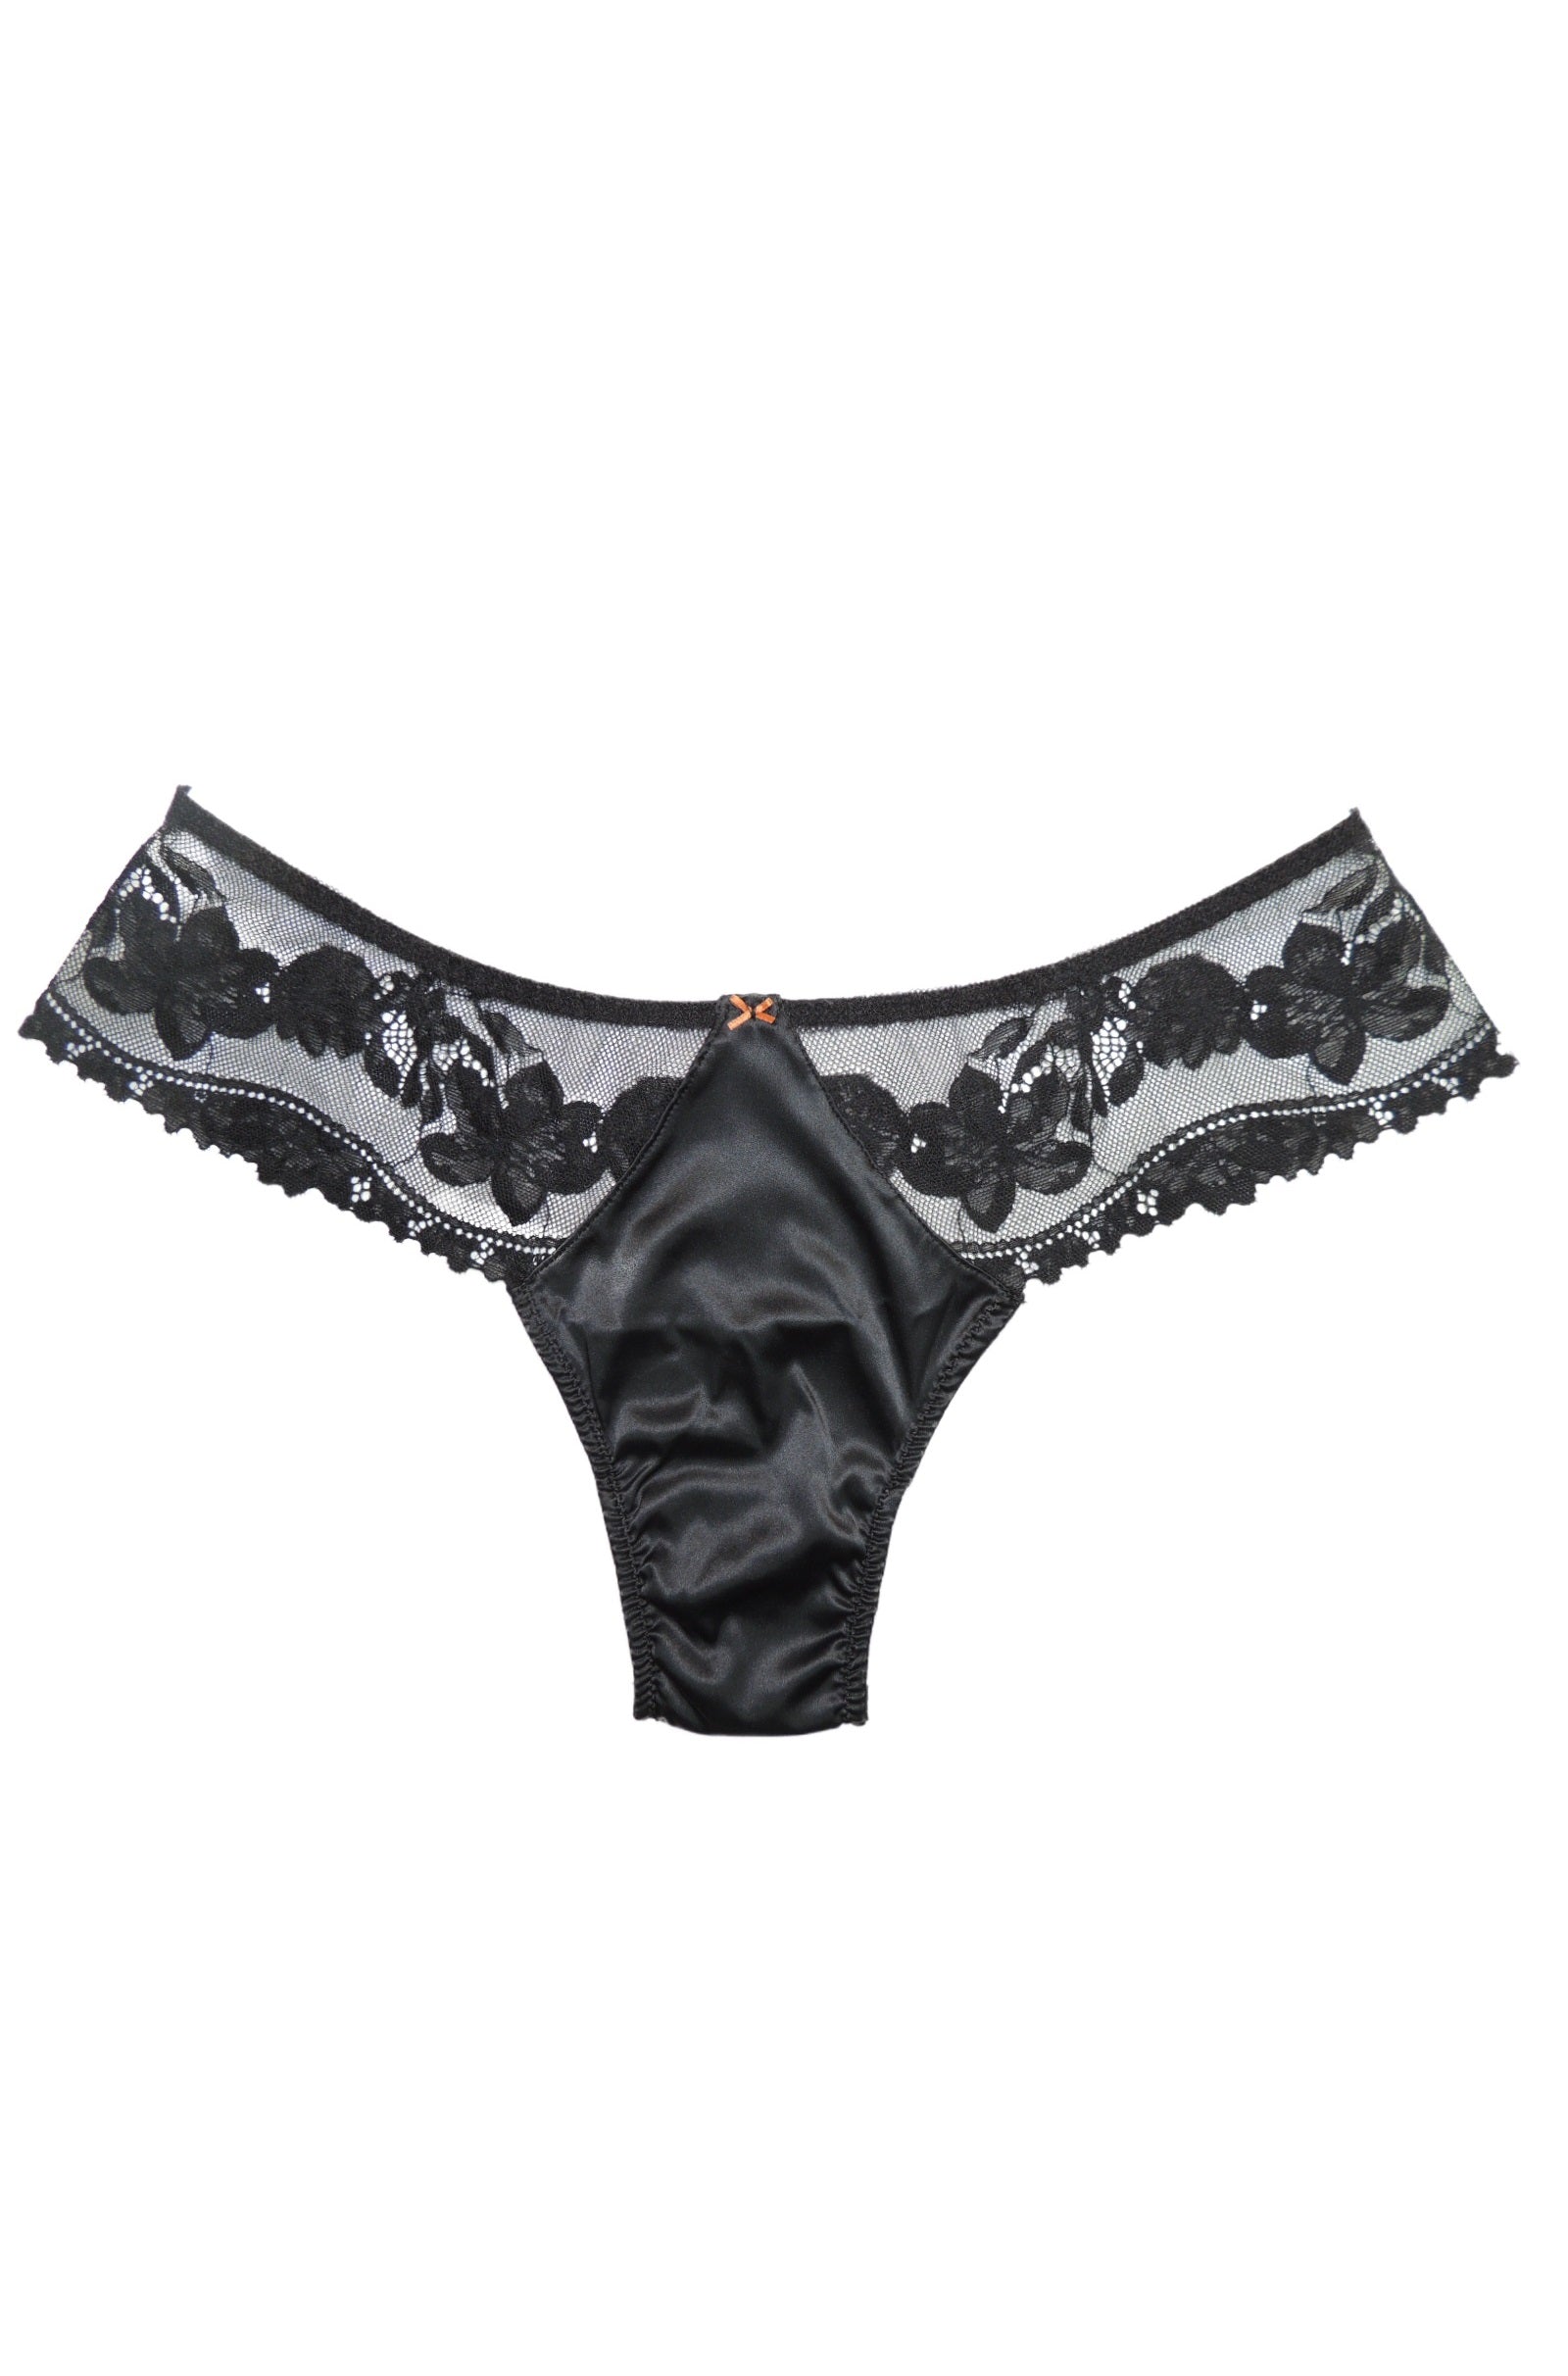 Elegant Lace Thong Panty for Plus Size Women Italy